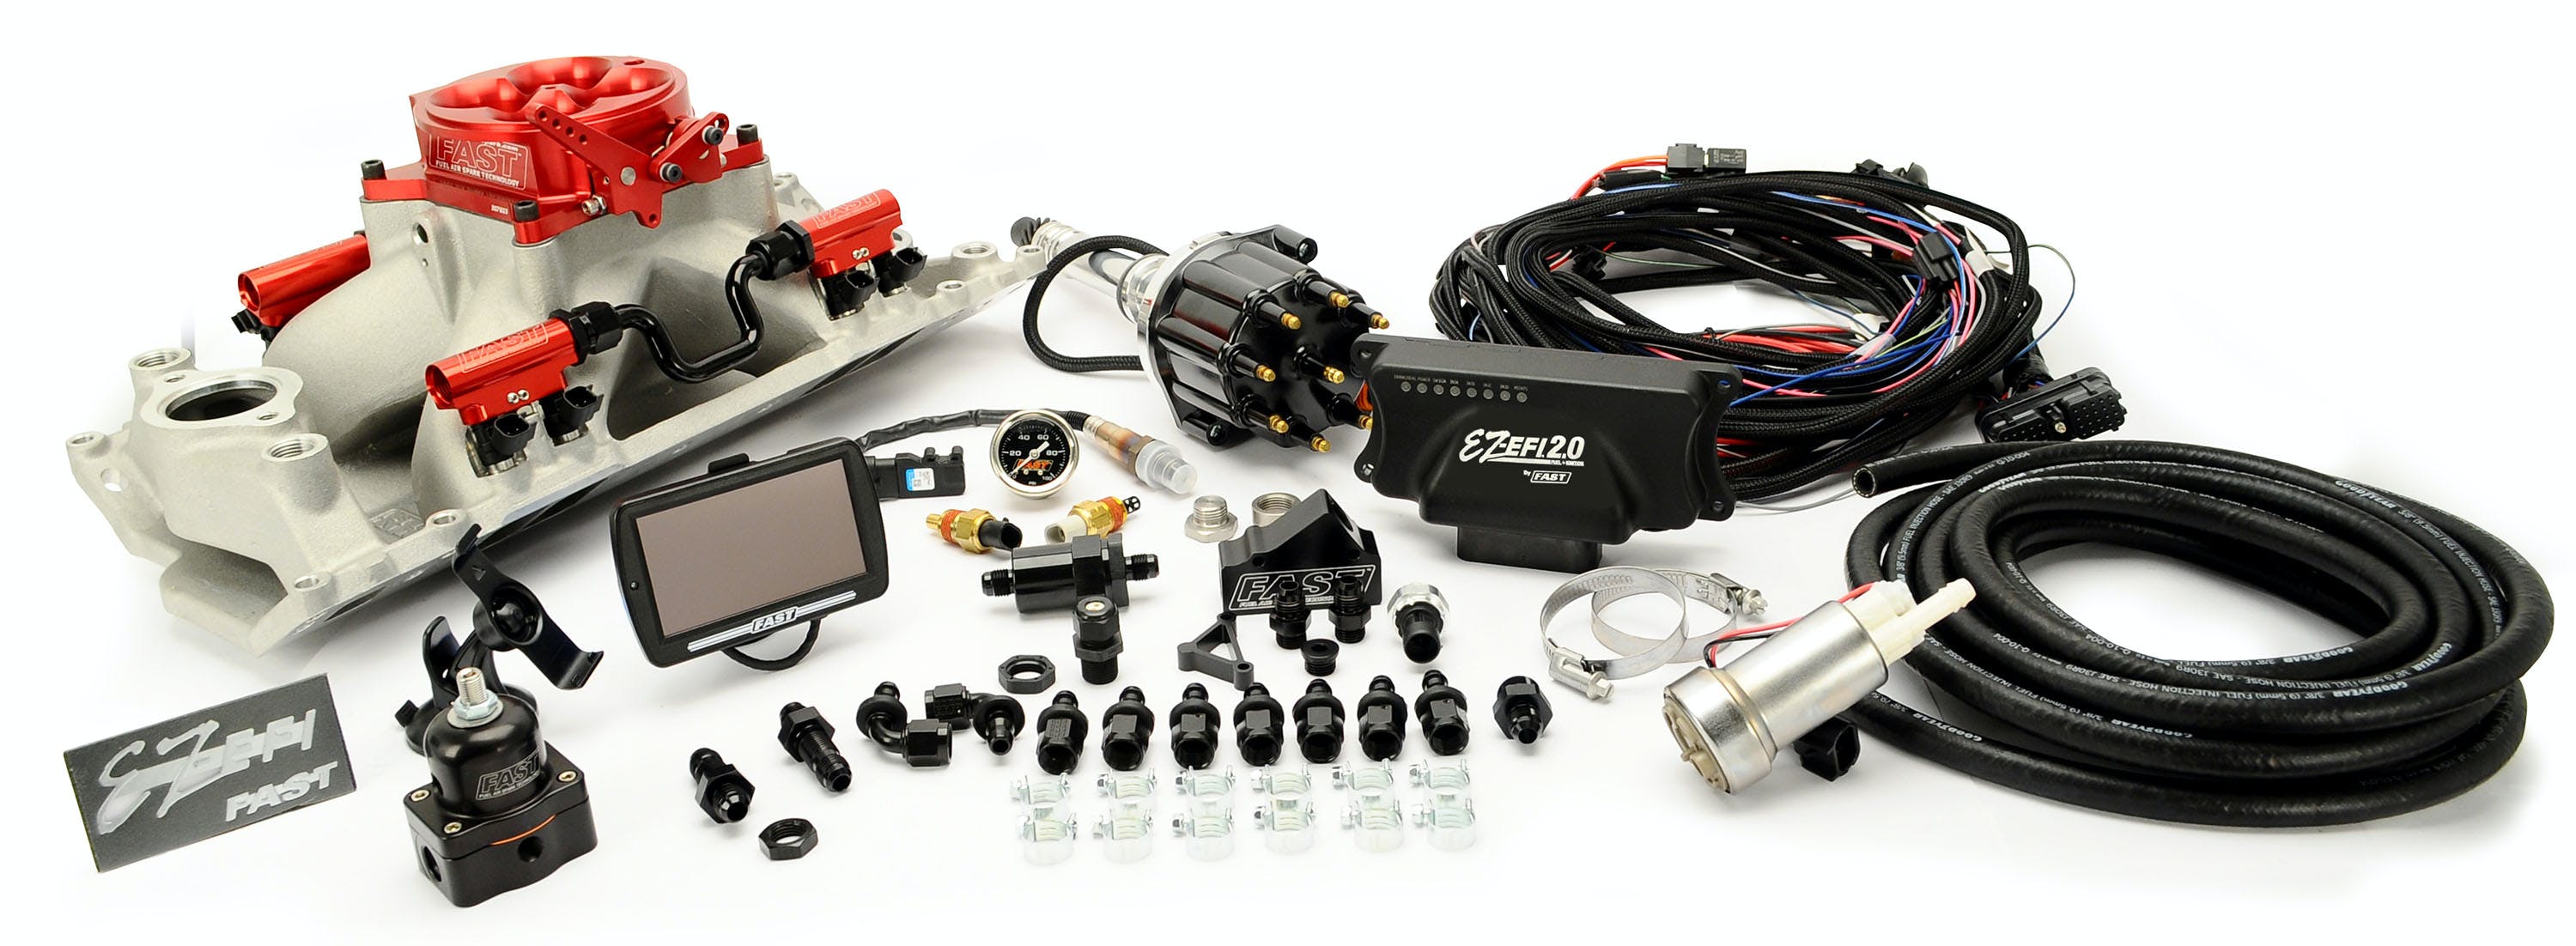 FAST - Fuel Air Spark Technology 30411-10T EZ 2.0 BBC Multiport w/intake, rails, throttle body, distributor and fuel pump